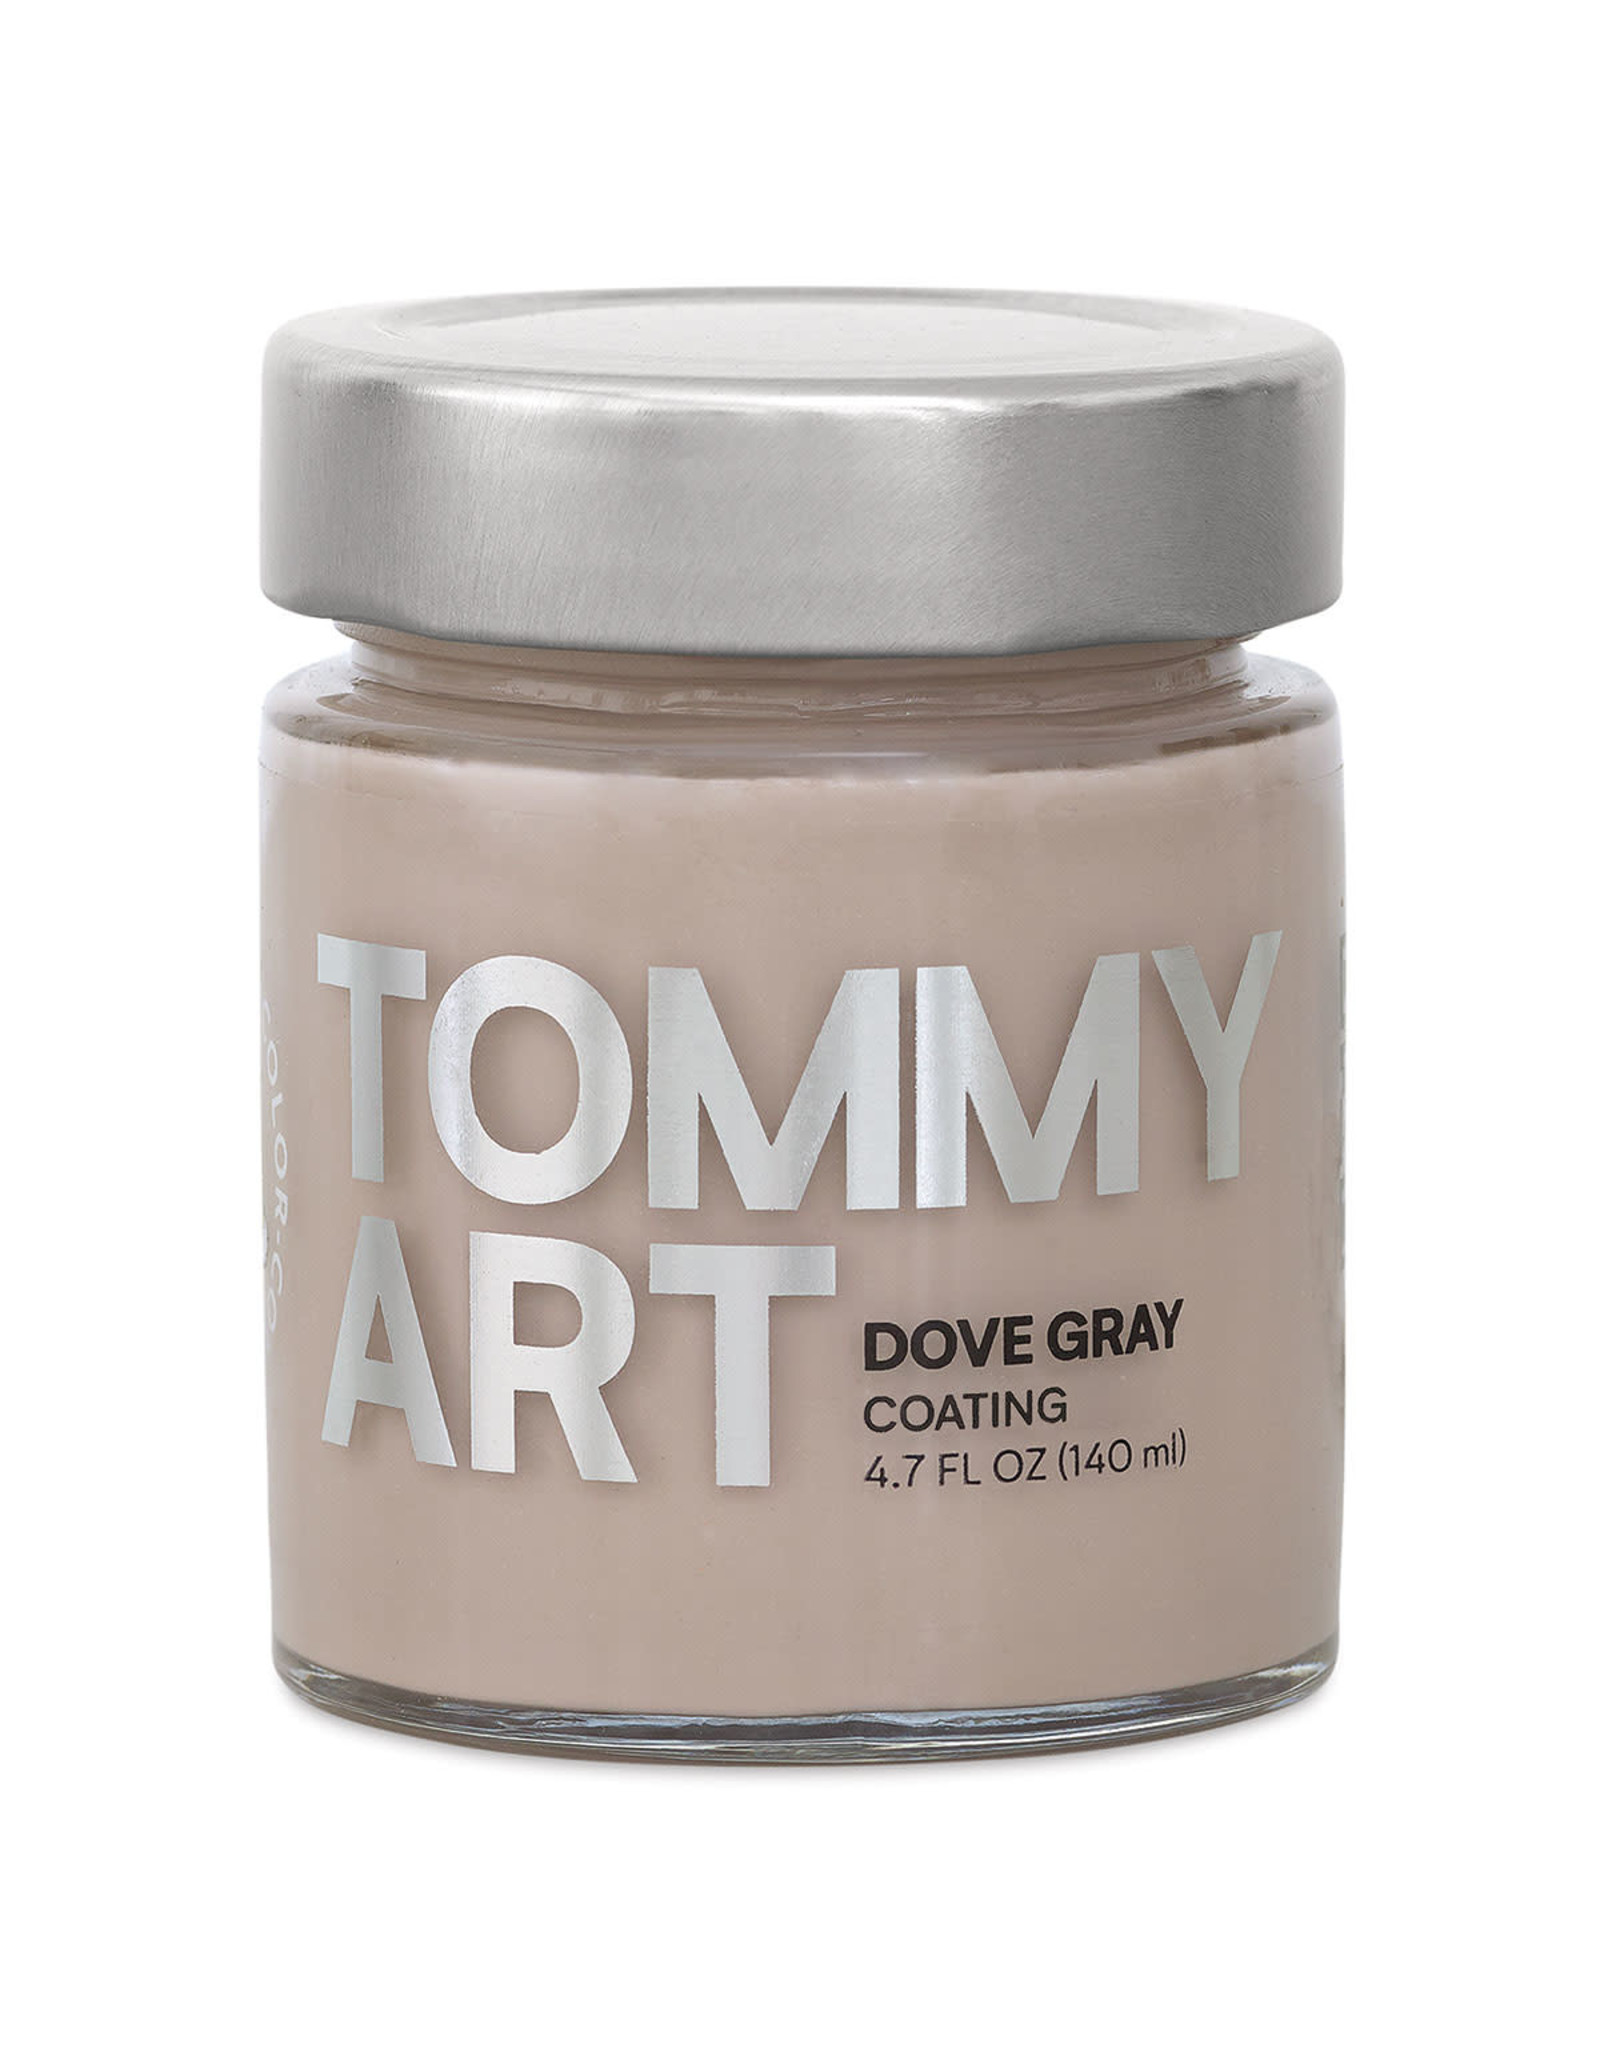 CLEARANCE Specialty- Dove Grey Coating 140ml